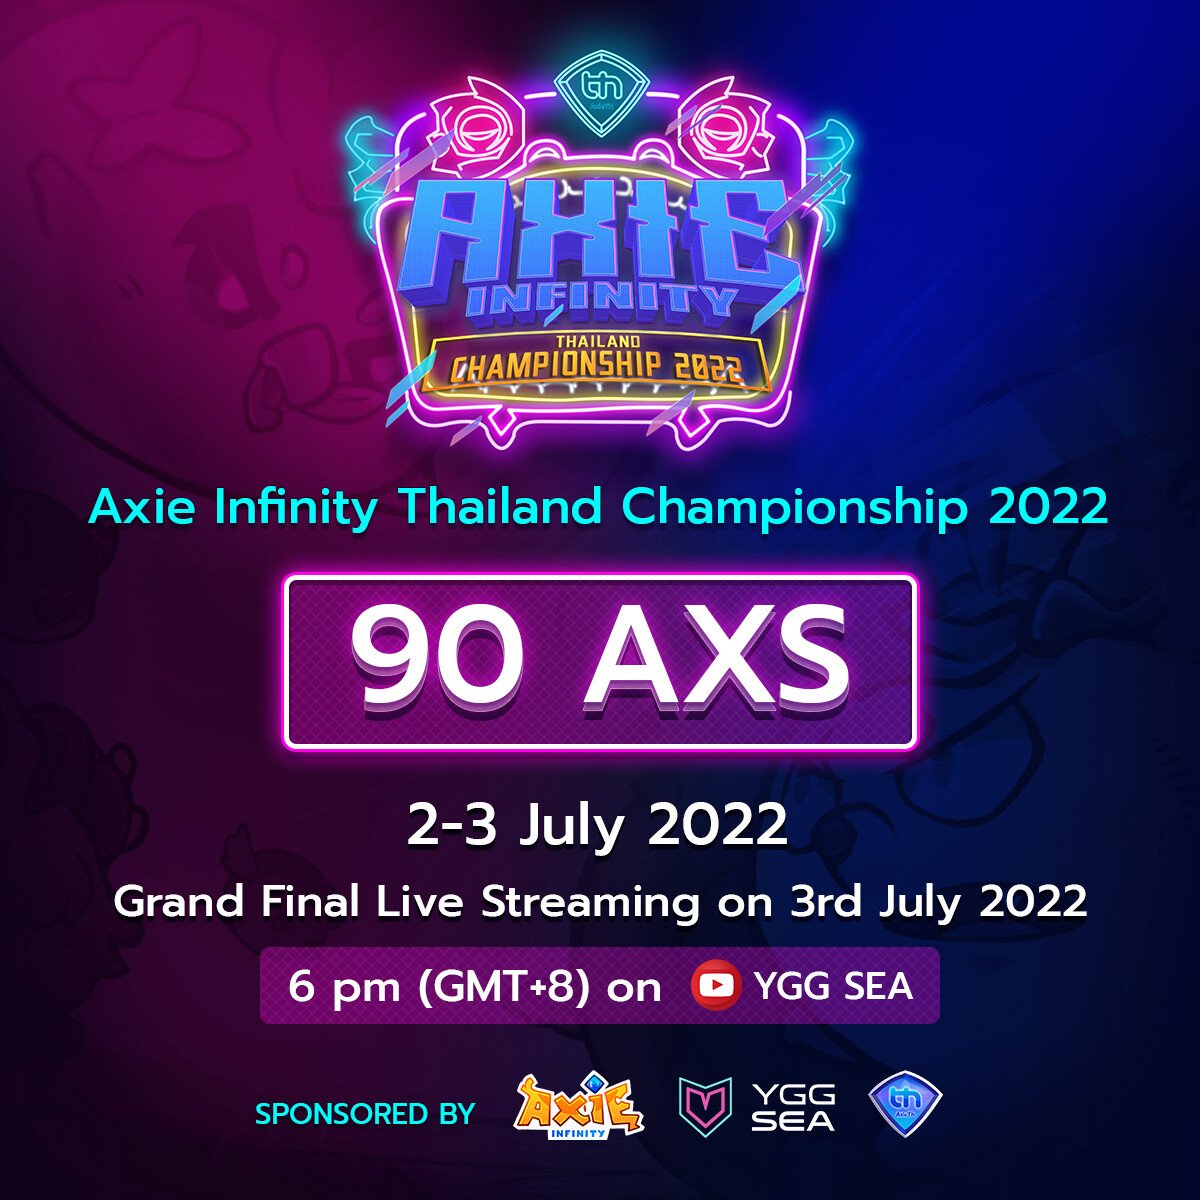 RT yggsea: #YGGSEA Thailand is hosting the @AxieInfinity Thailand Championship starting tomorrow from July 2nd to 3rd!  We will be streaming the Grand Final on July 3rd at 6pm GMT+8 🙌  Join us here for the Grand Final: [youtube.com]  #WeAreSEA #WeAreYGG [twitter.com] [pbs.twimg.com]